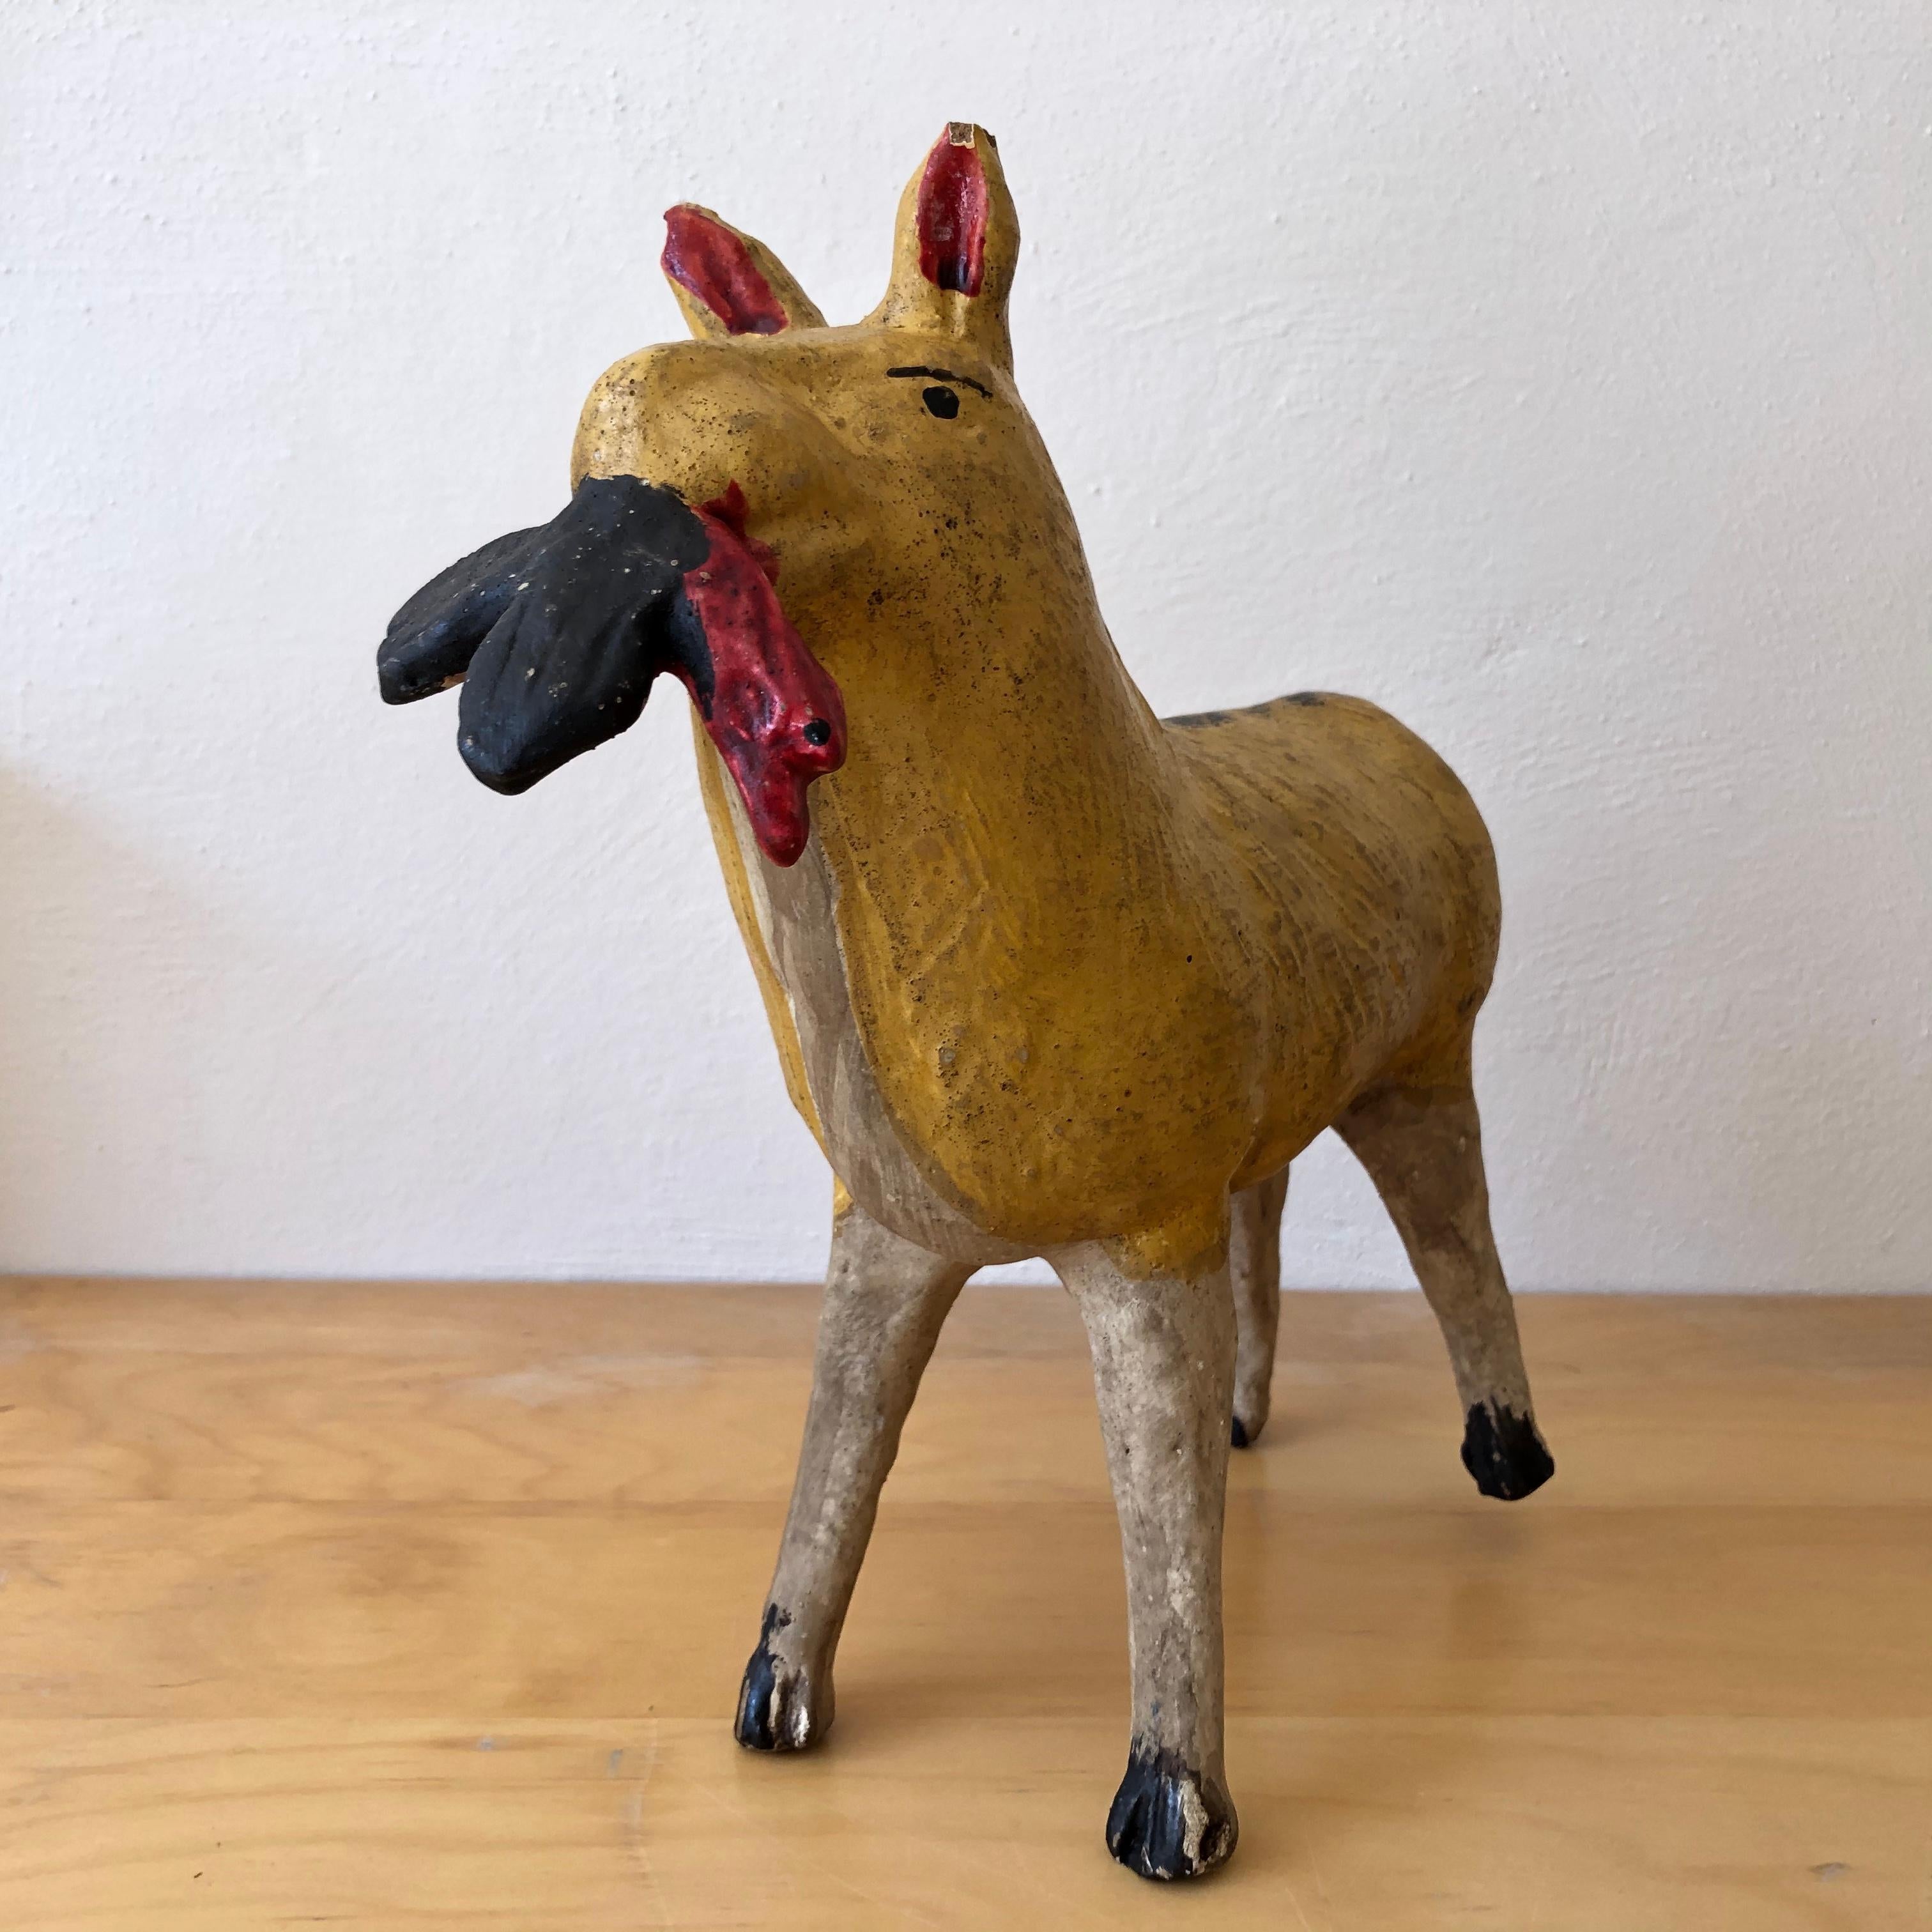 Yellow mustard coyote piggy bank from the border area of the state of Mexico with Guerrero. Classic Folk Art pieces that are very difficult to come by because of their fragile nature, circa 1980s.